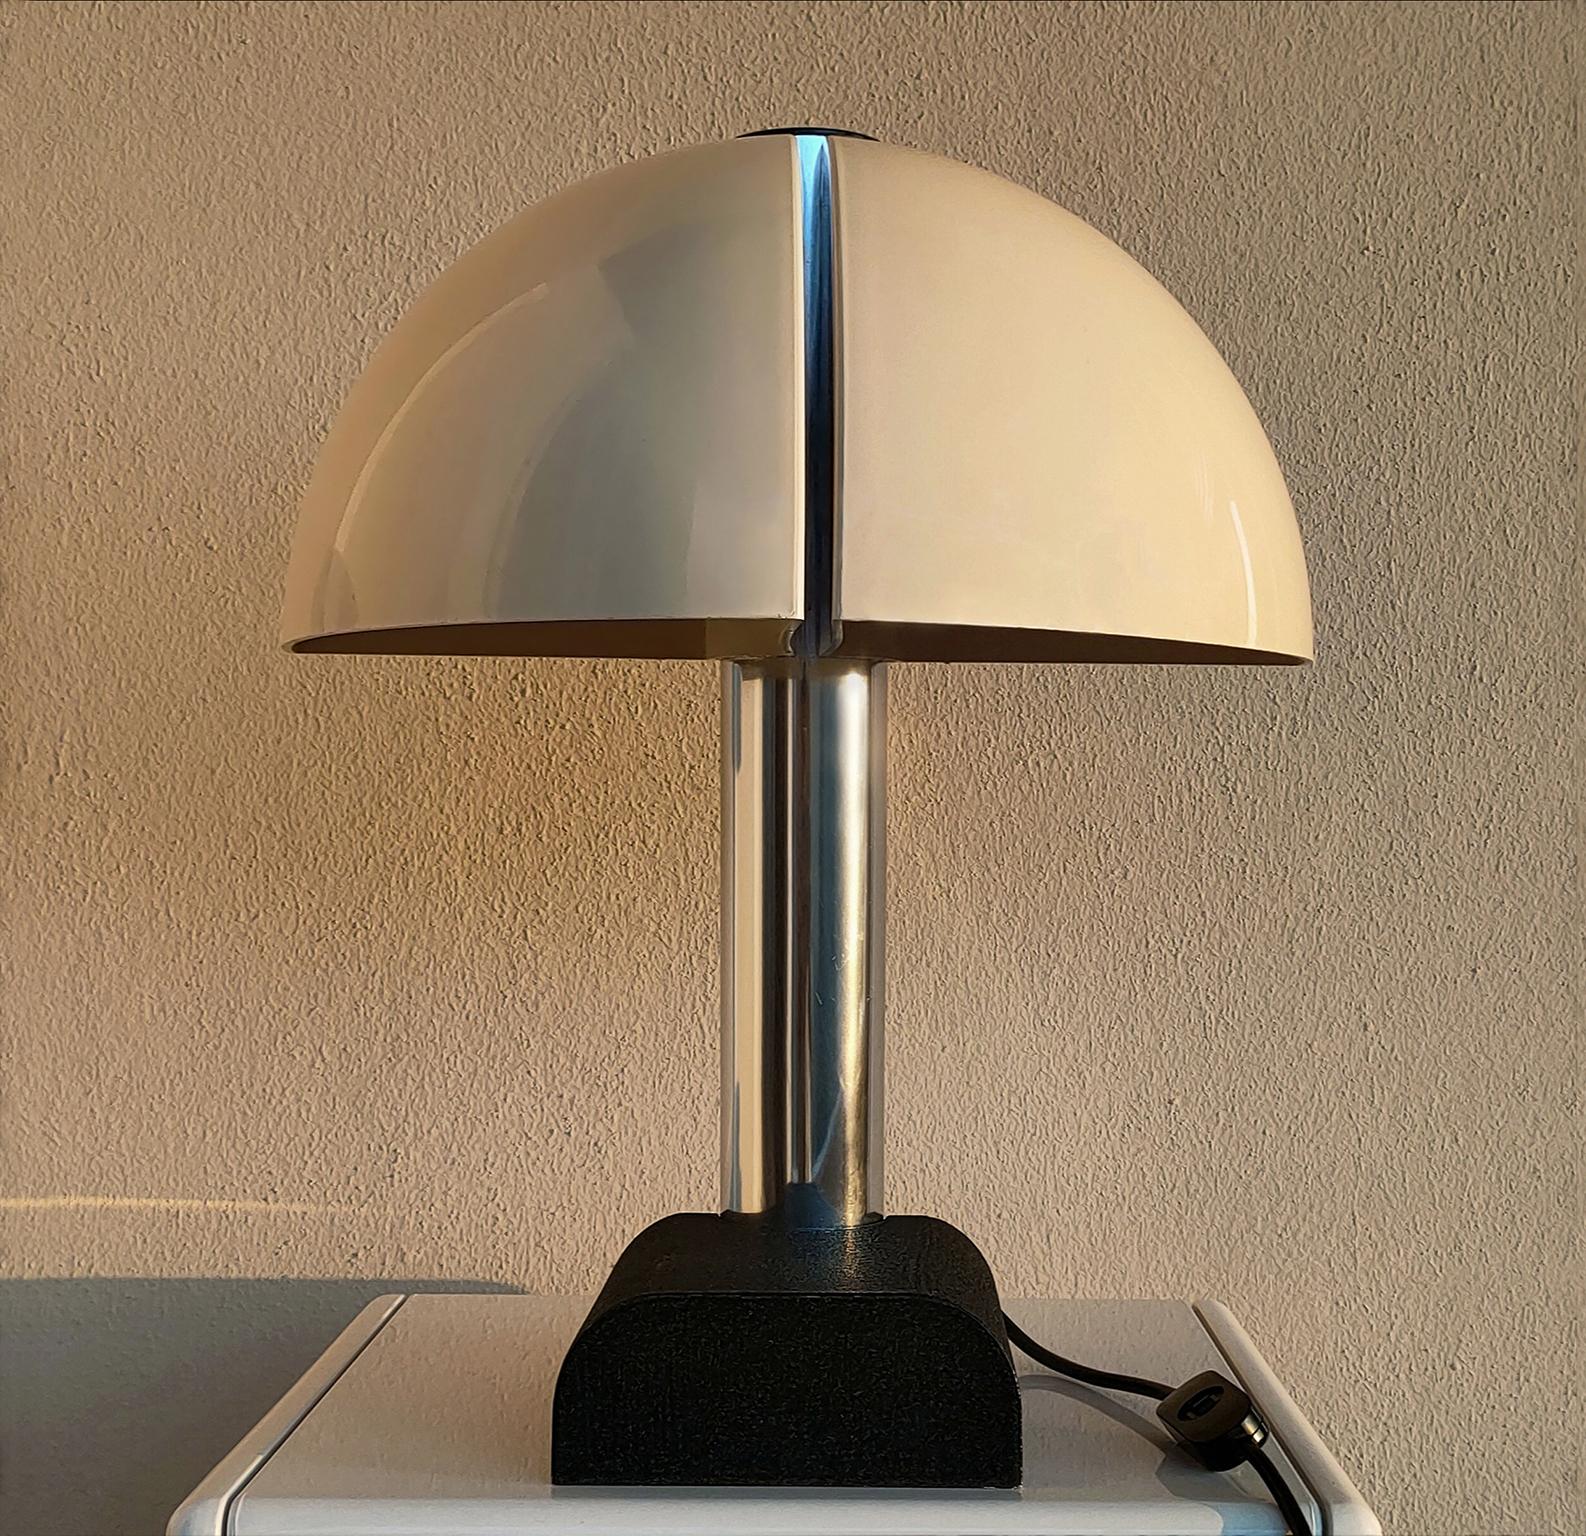 Spicchio table lamp designed by the Aroldi brothers (Danilo and
Corrado) in the early 1970s and produced by the famous Italian company Stilnovo.

The Spicchio lamp presents a tubular chromed metal frame, a black lacquered metal base, and a